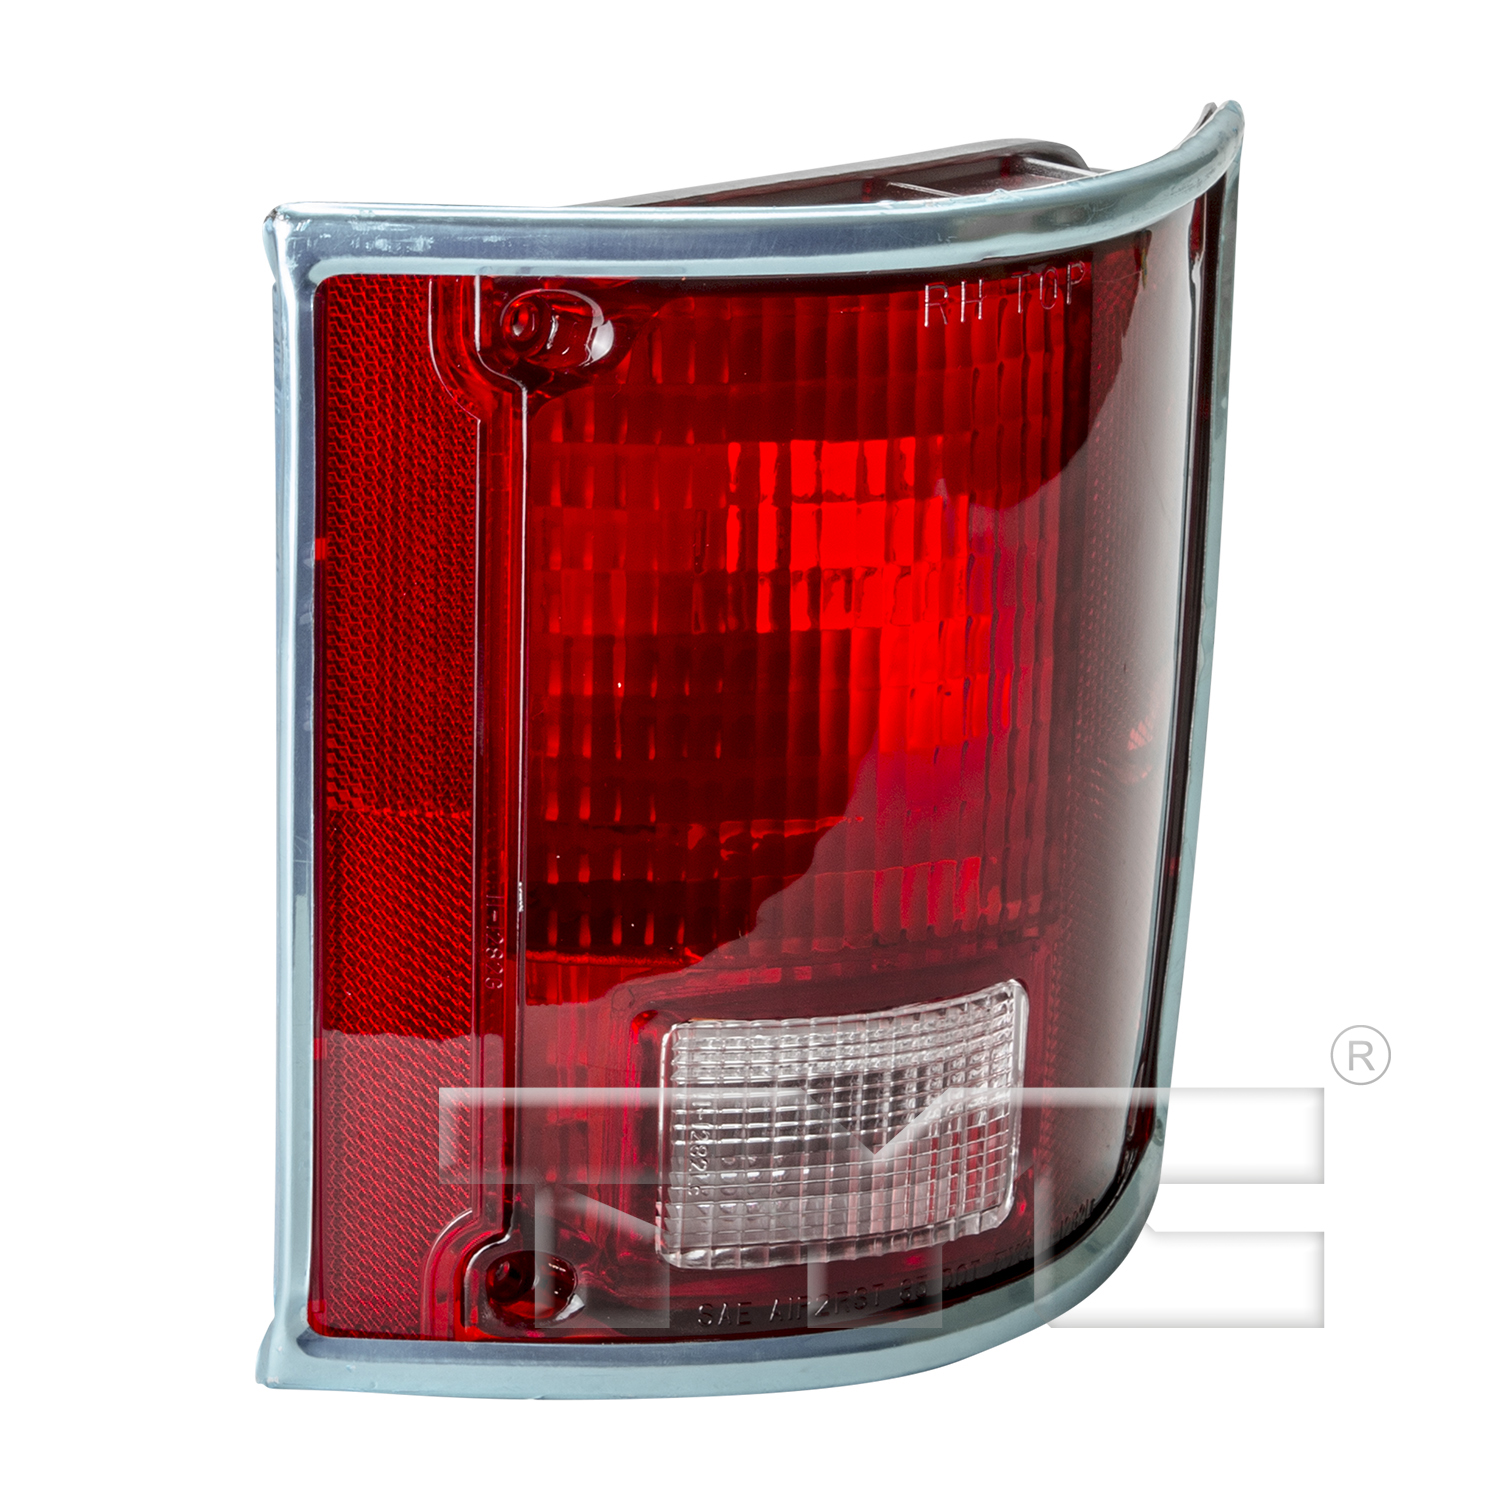 Aftermarket TAILLIGHTS for GMC - K15, K15,78-78,RT Taillamp assy